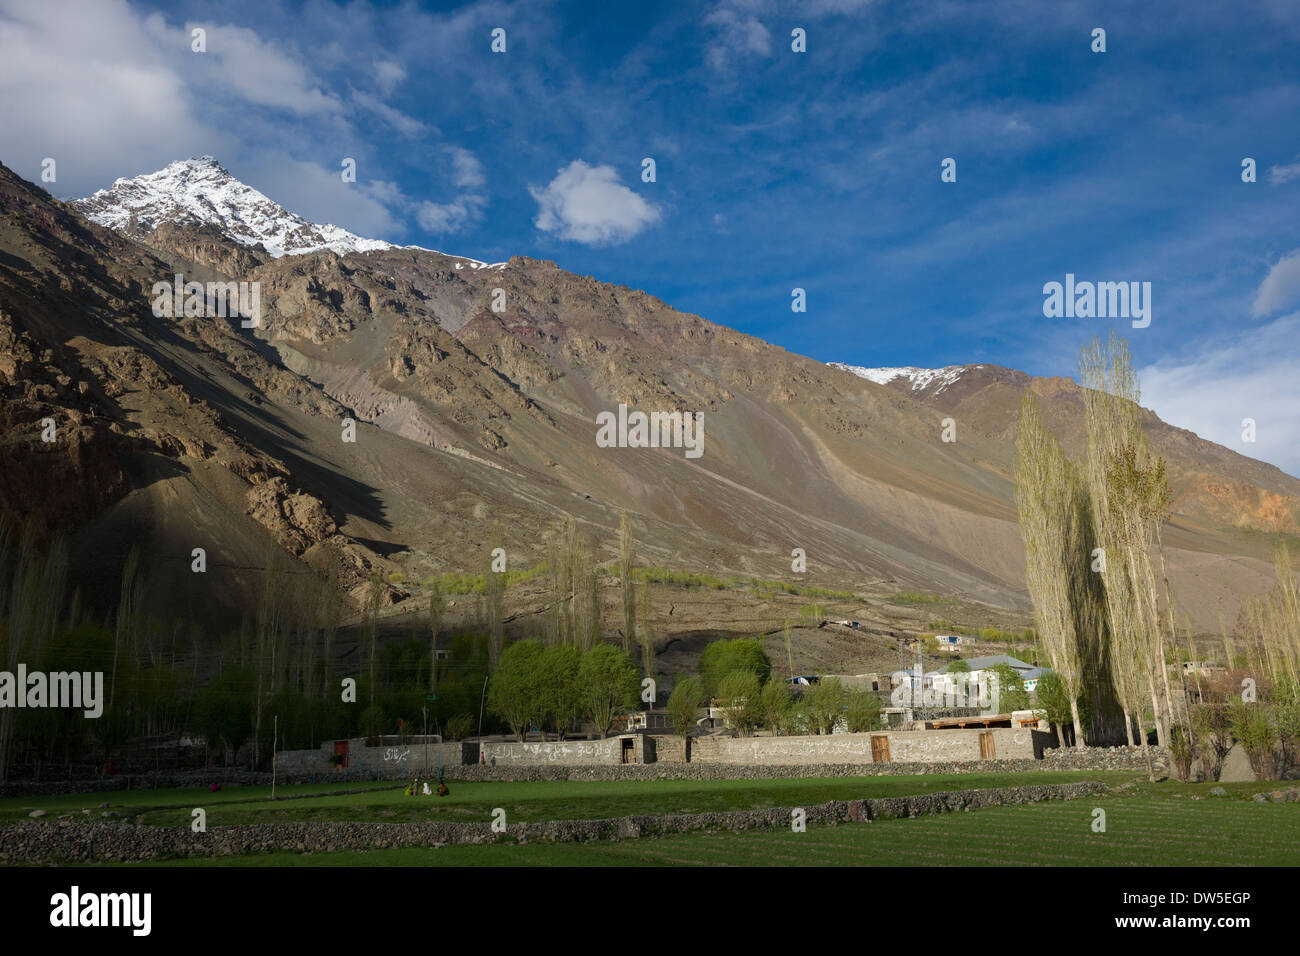 Locals sitting outside in fields outside of a walled compound, in the Ghizar River (Gilgit River) Valley near Golaghmuli, seen from the Shandur-Gilgit Road, near the Shandur Pass, Gilgit-Baltistan, Pakistan Stock Photo